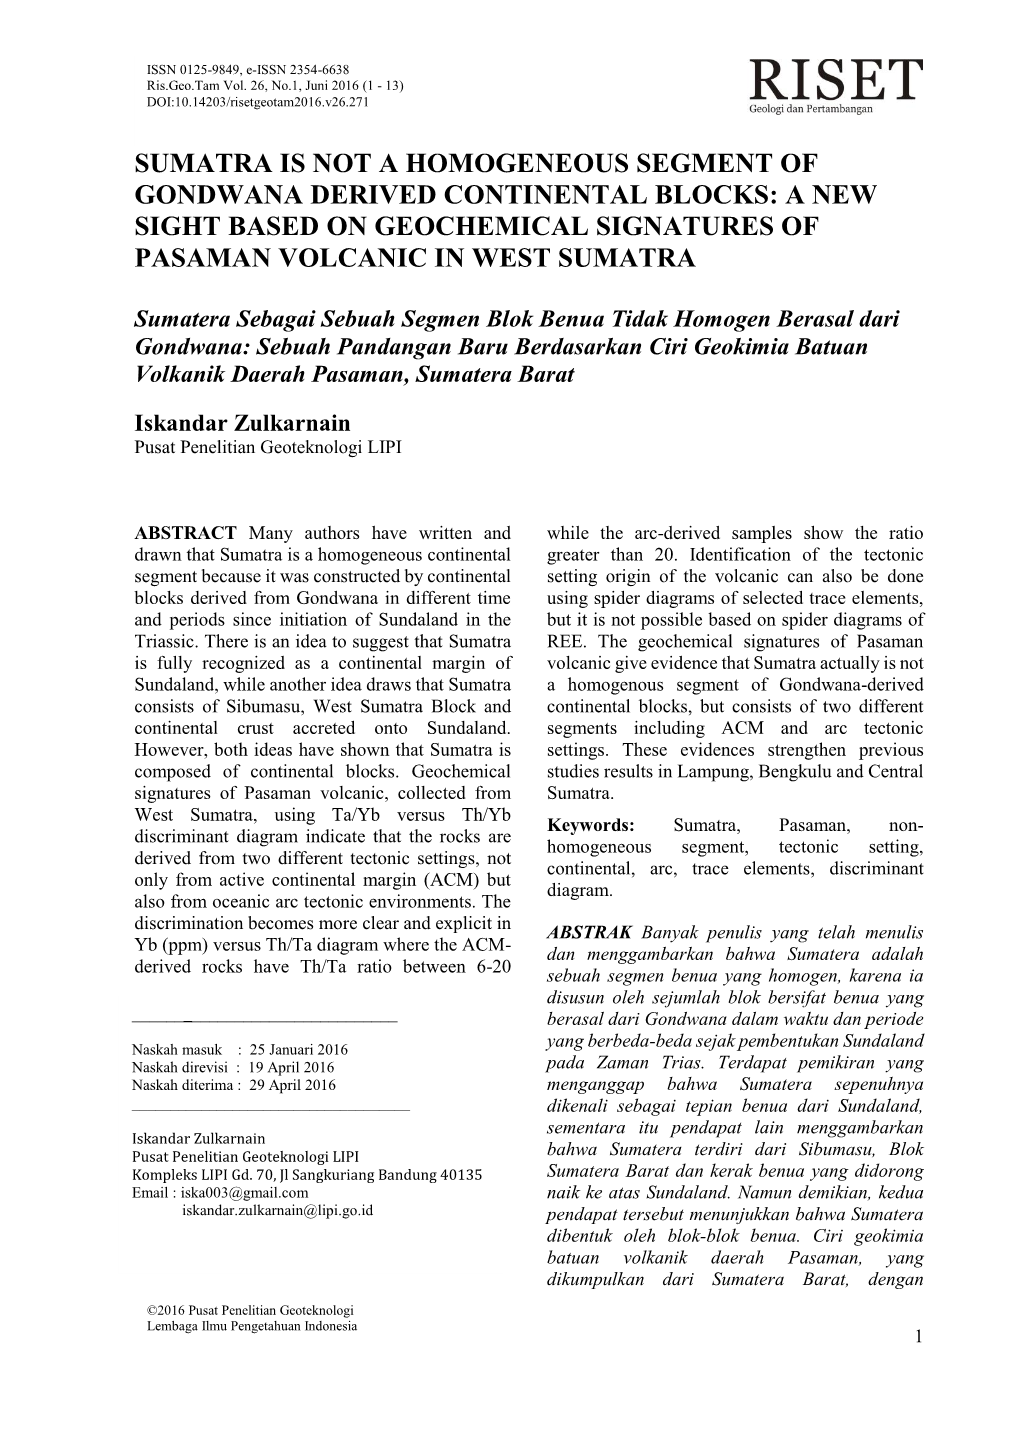 Sumatra Is Not a Homogeneous Segment of Gondwana Derived Continental Blocks: a New Sight Based on Geochemical Signatures of Pasaman Volcanic in West Sumatra